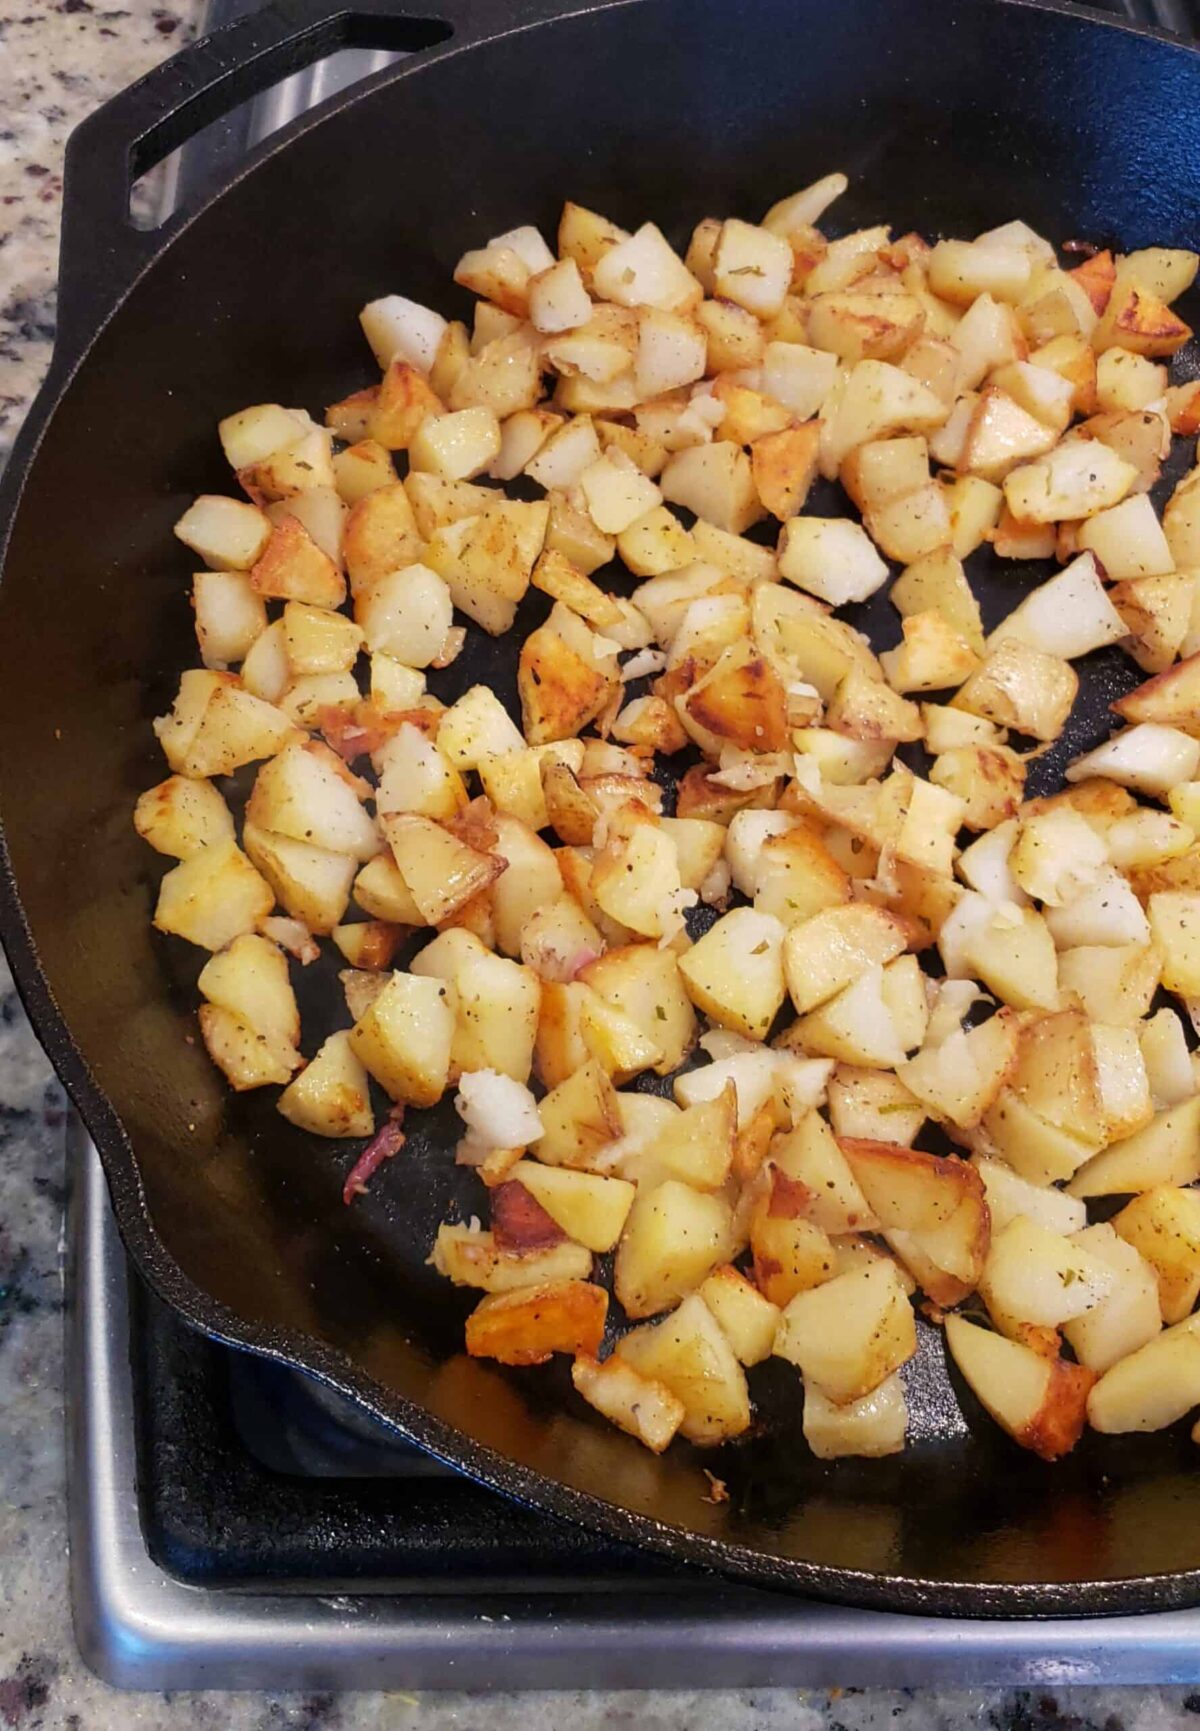 fried chopped potatoes with red skins in a cast iron skillet